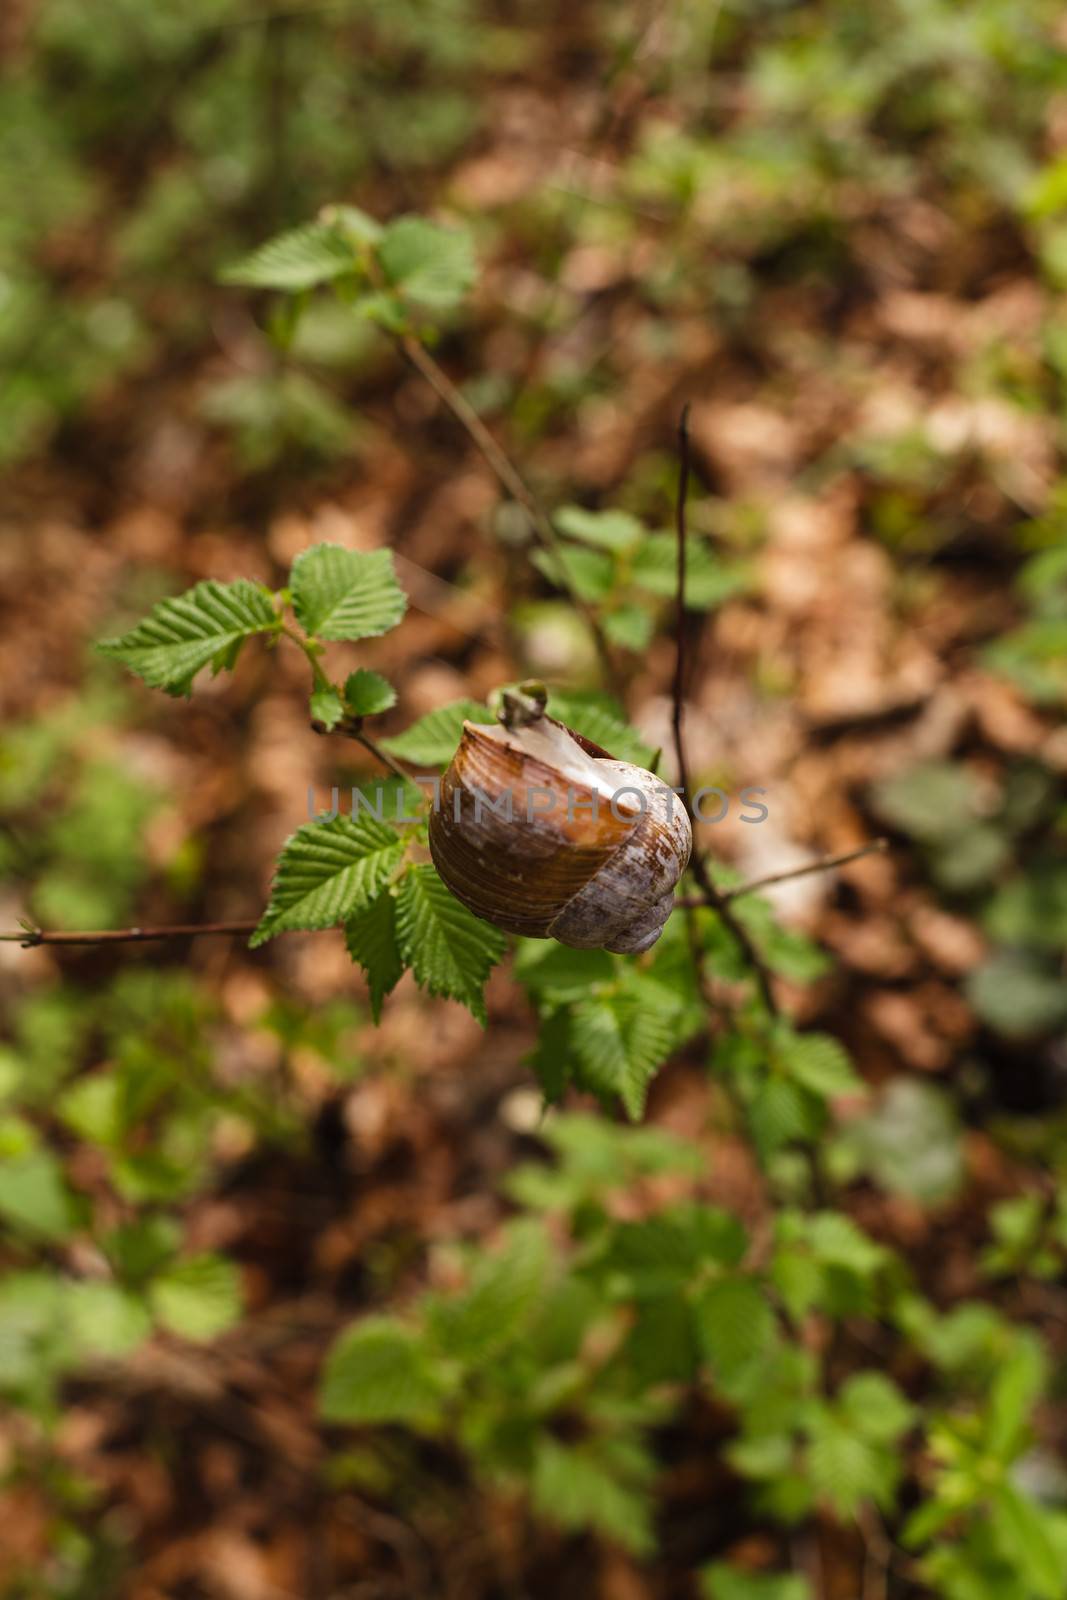 Beautiful Snail on a branch in the forest